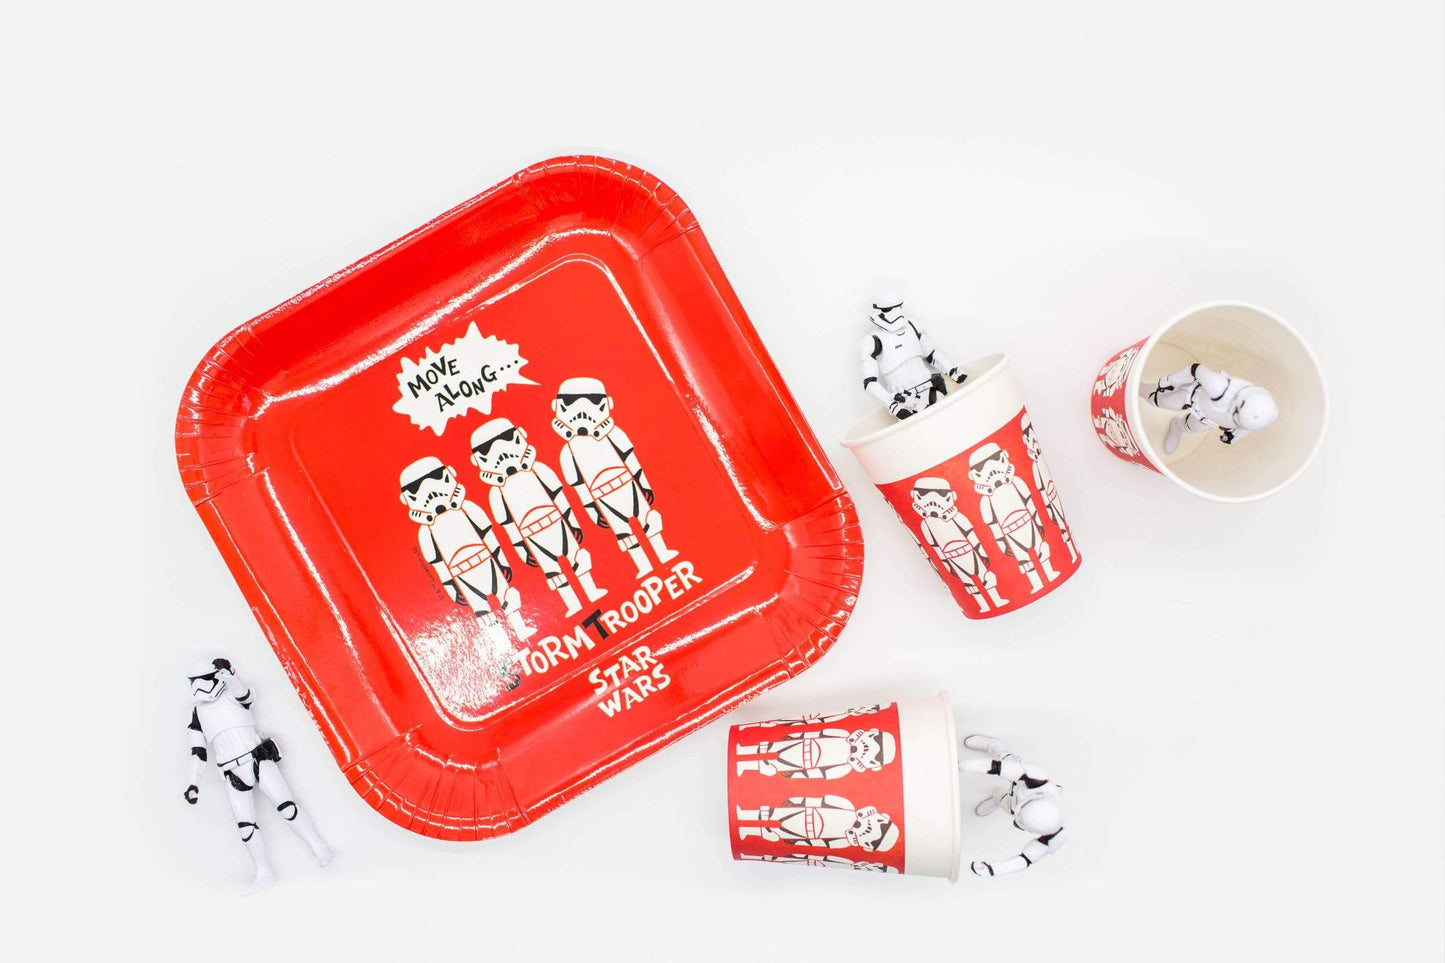 Star Wars Party Cups | Stromtrooper Paper Cups | Star Wars Party Ideas Qualatex